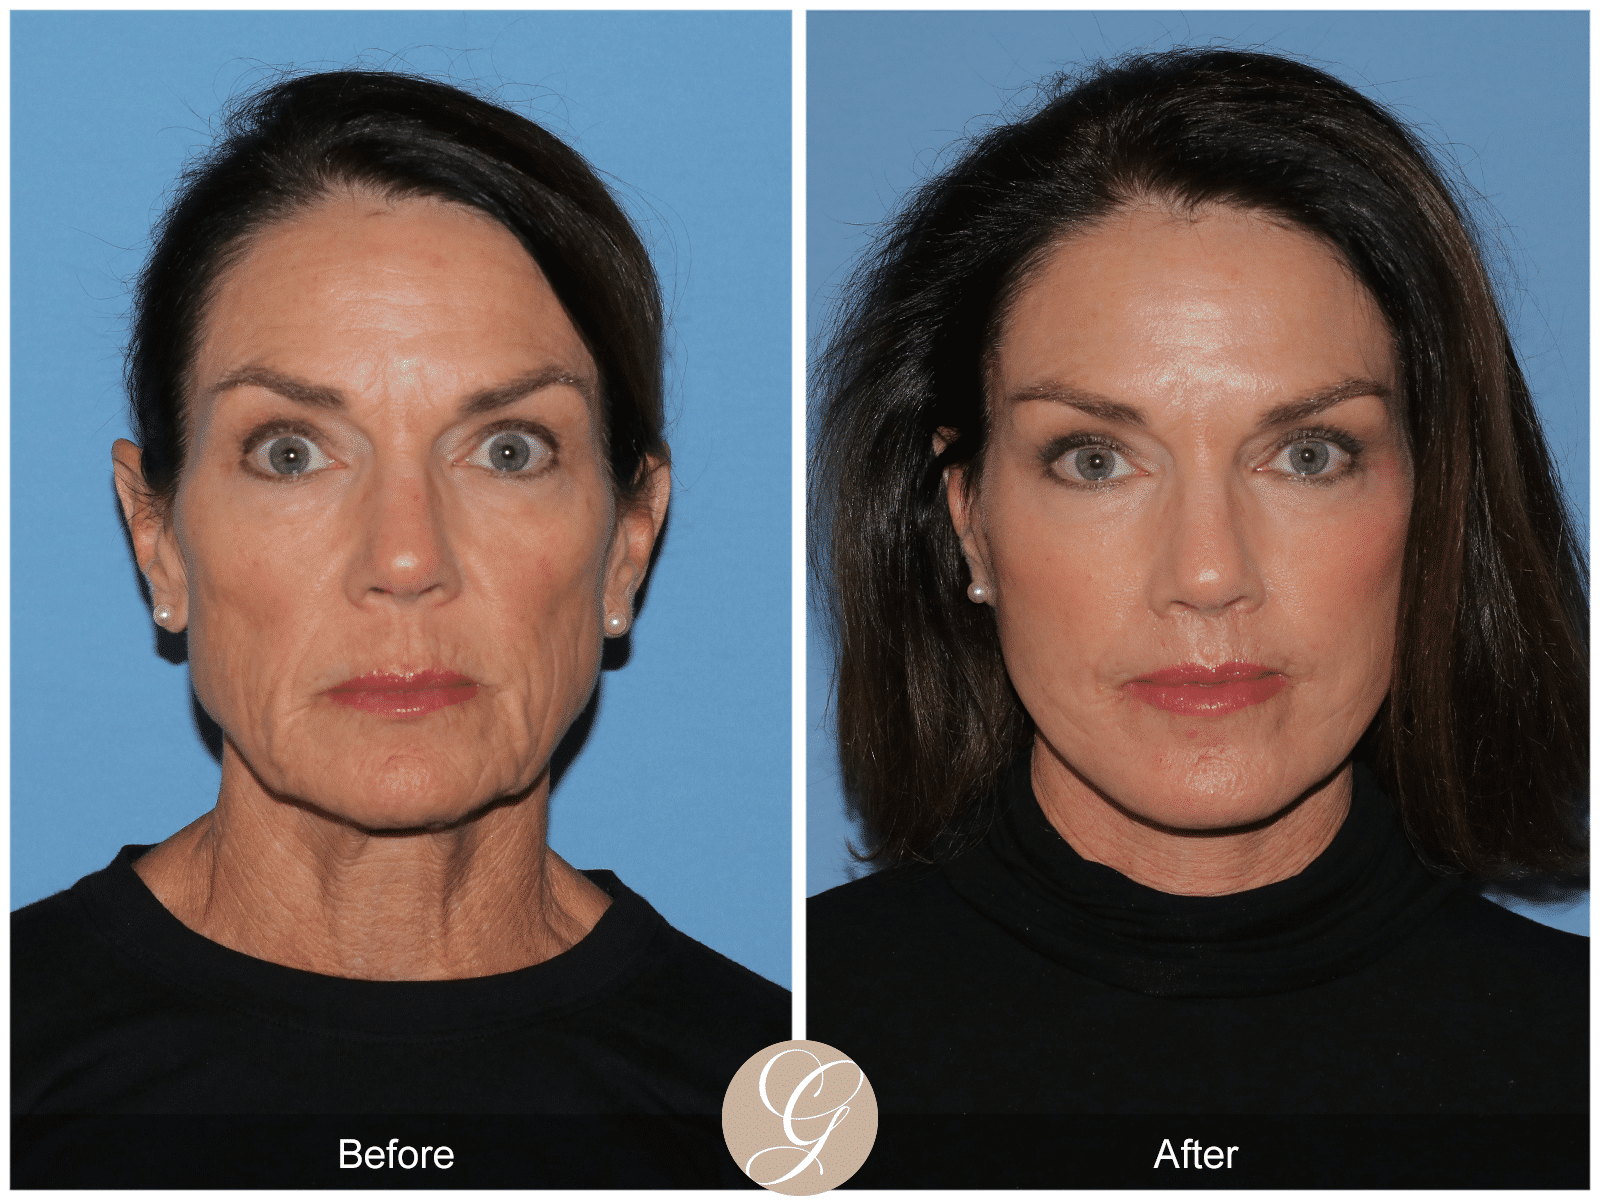 What is the importance of compression after facelift surgery?